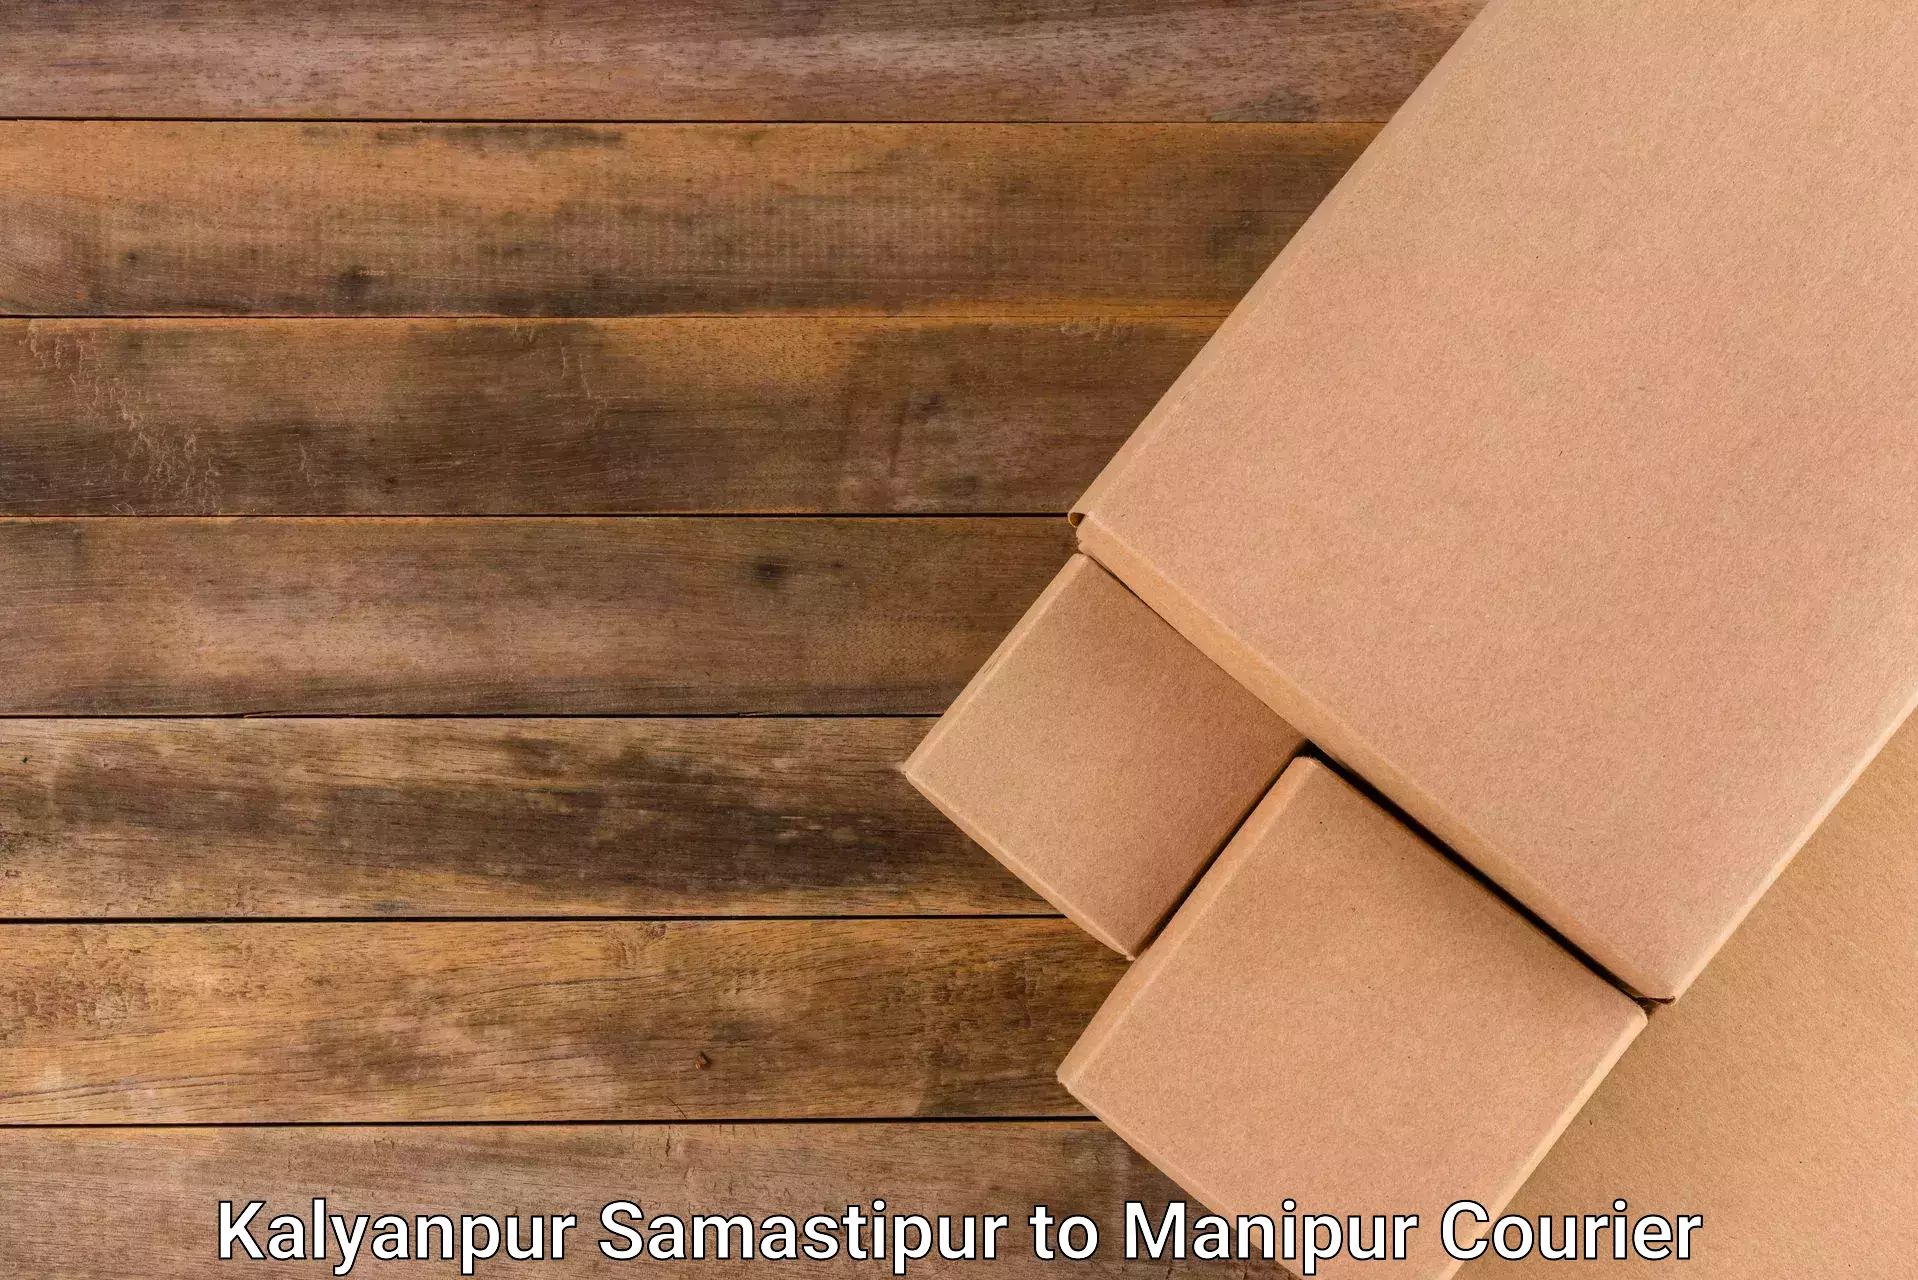 Express courier facilities Kalyanpur Samastipur to Manipur